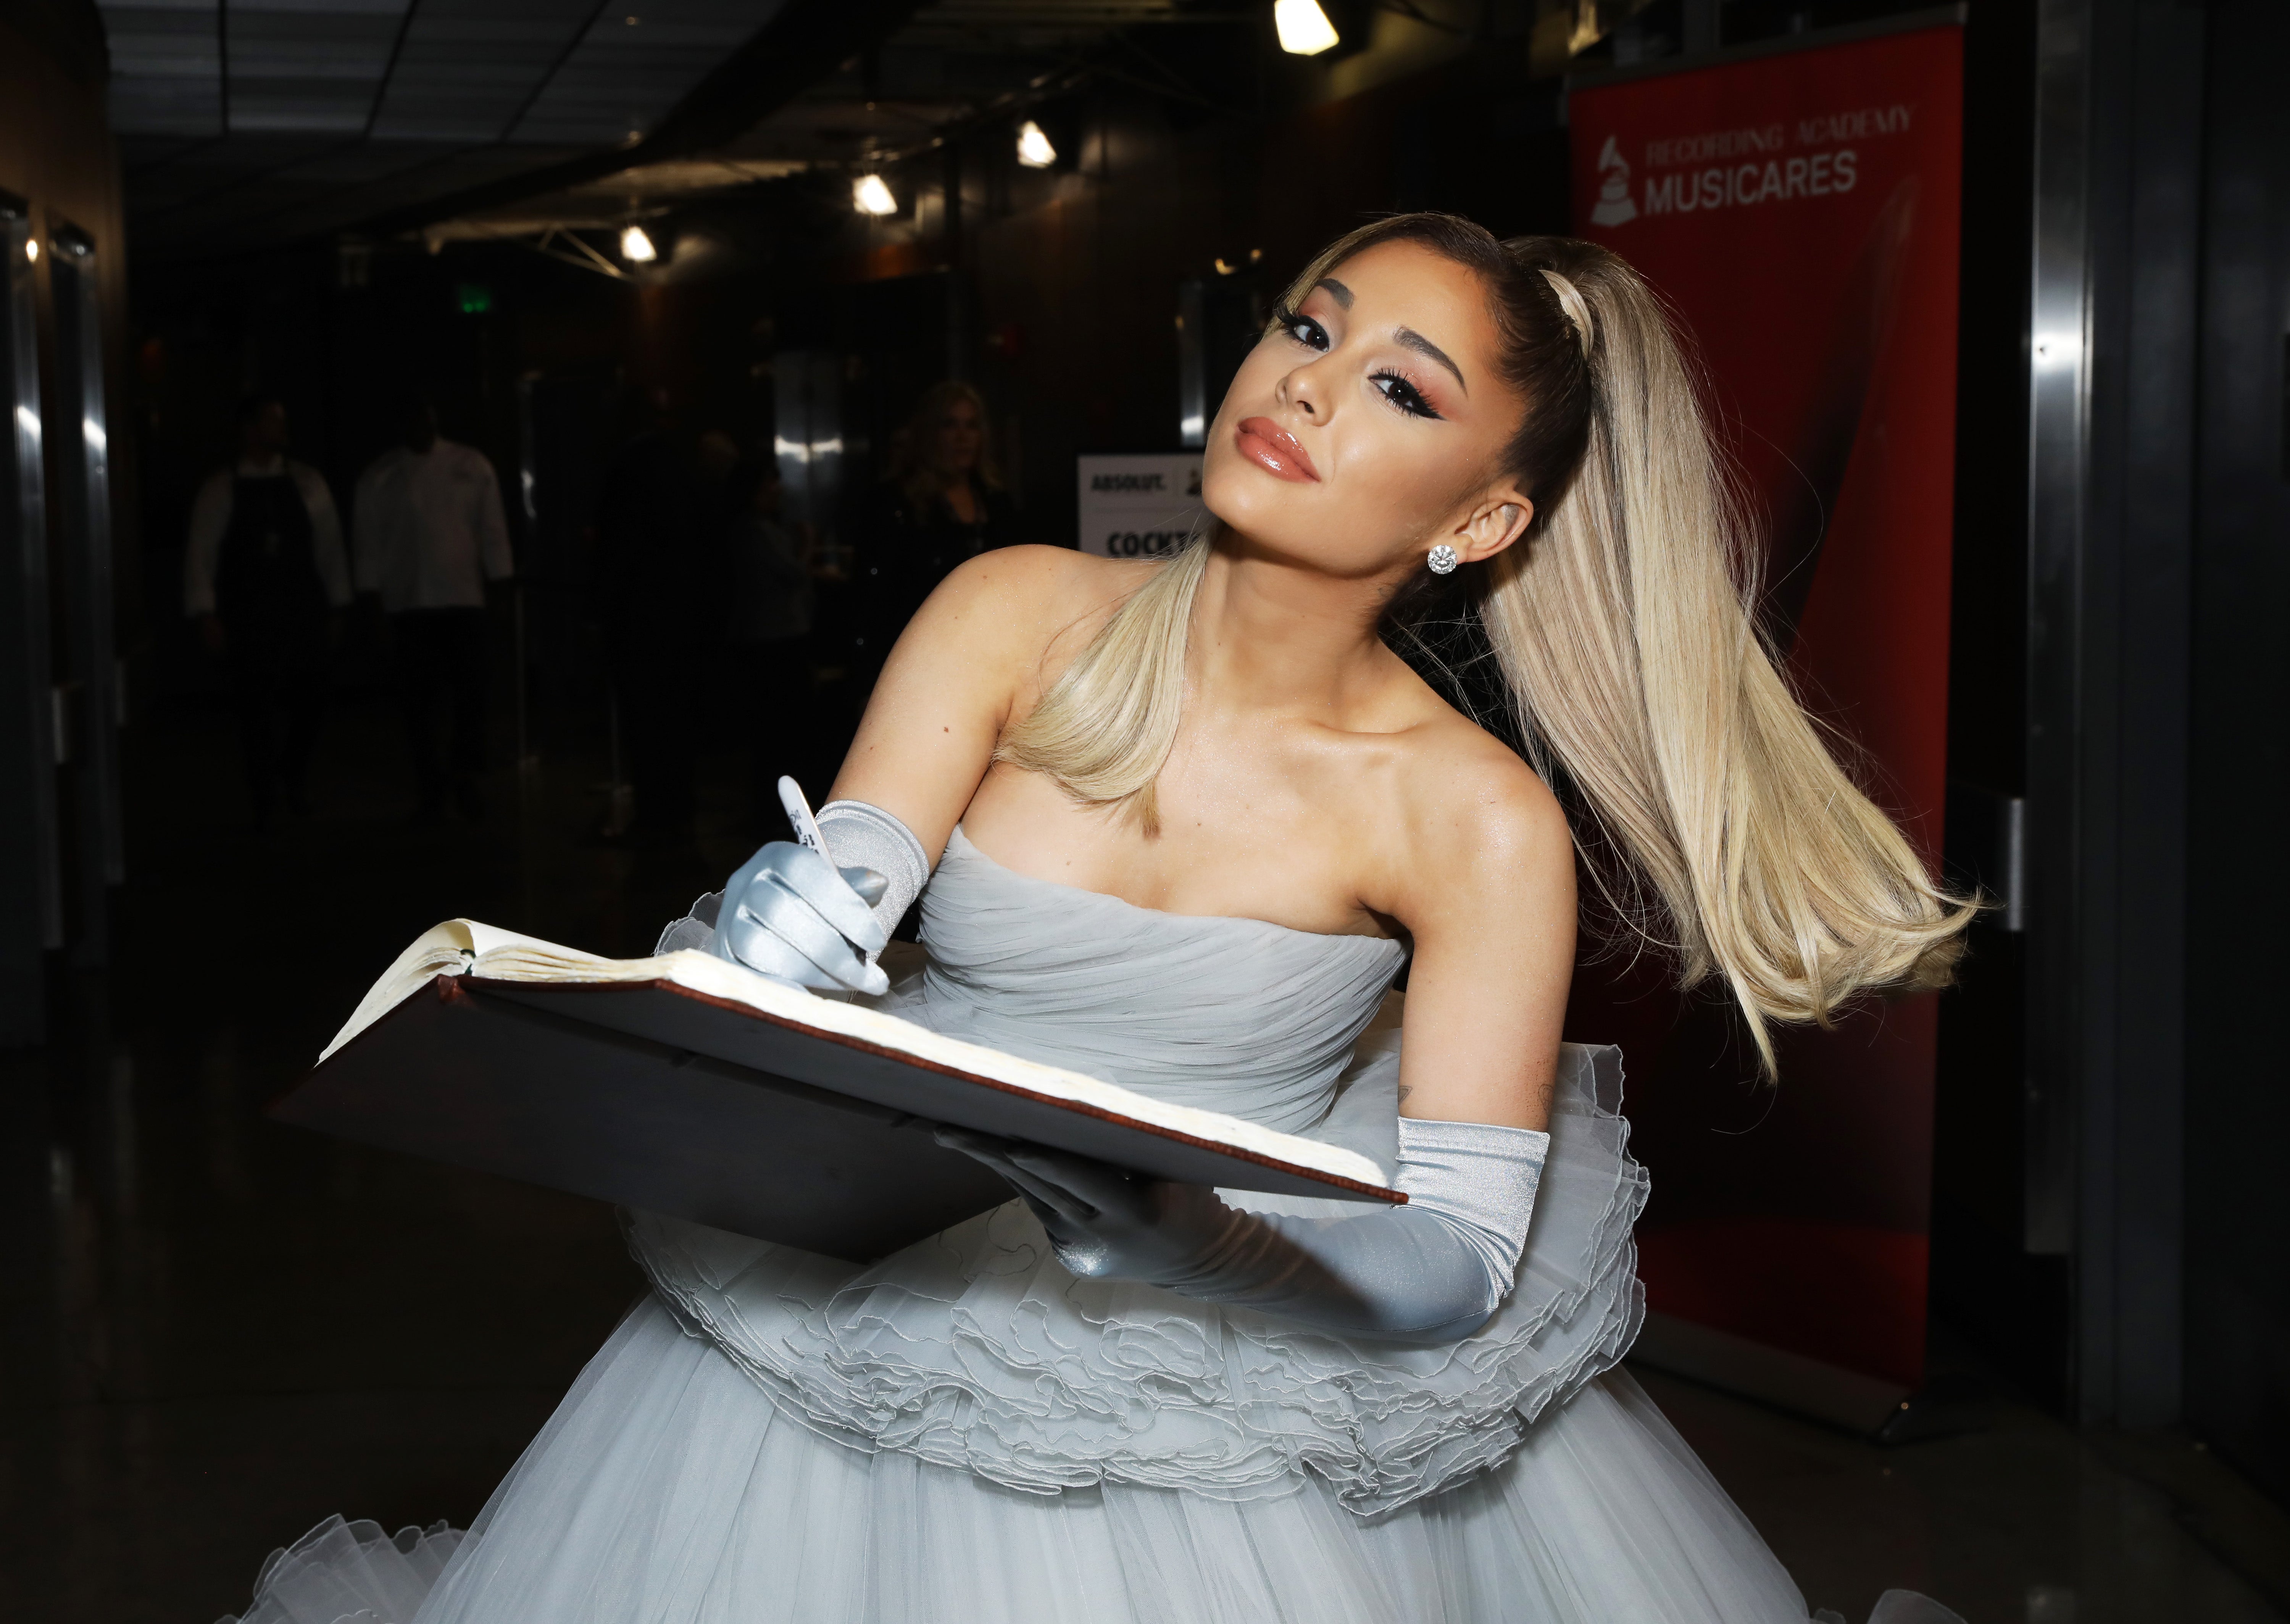 Ariana Grande at the Grammys on 26 January 2020 in Los Angeles, California